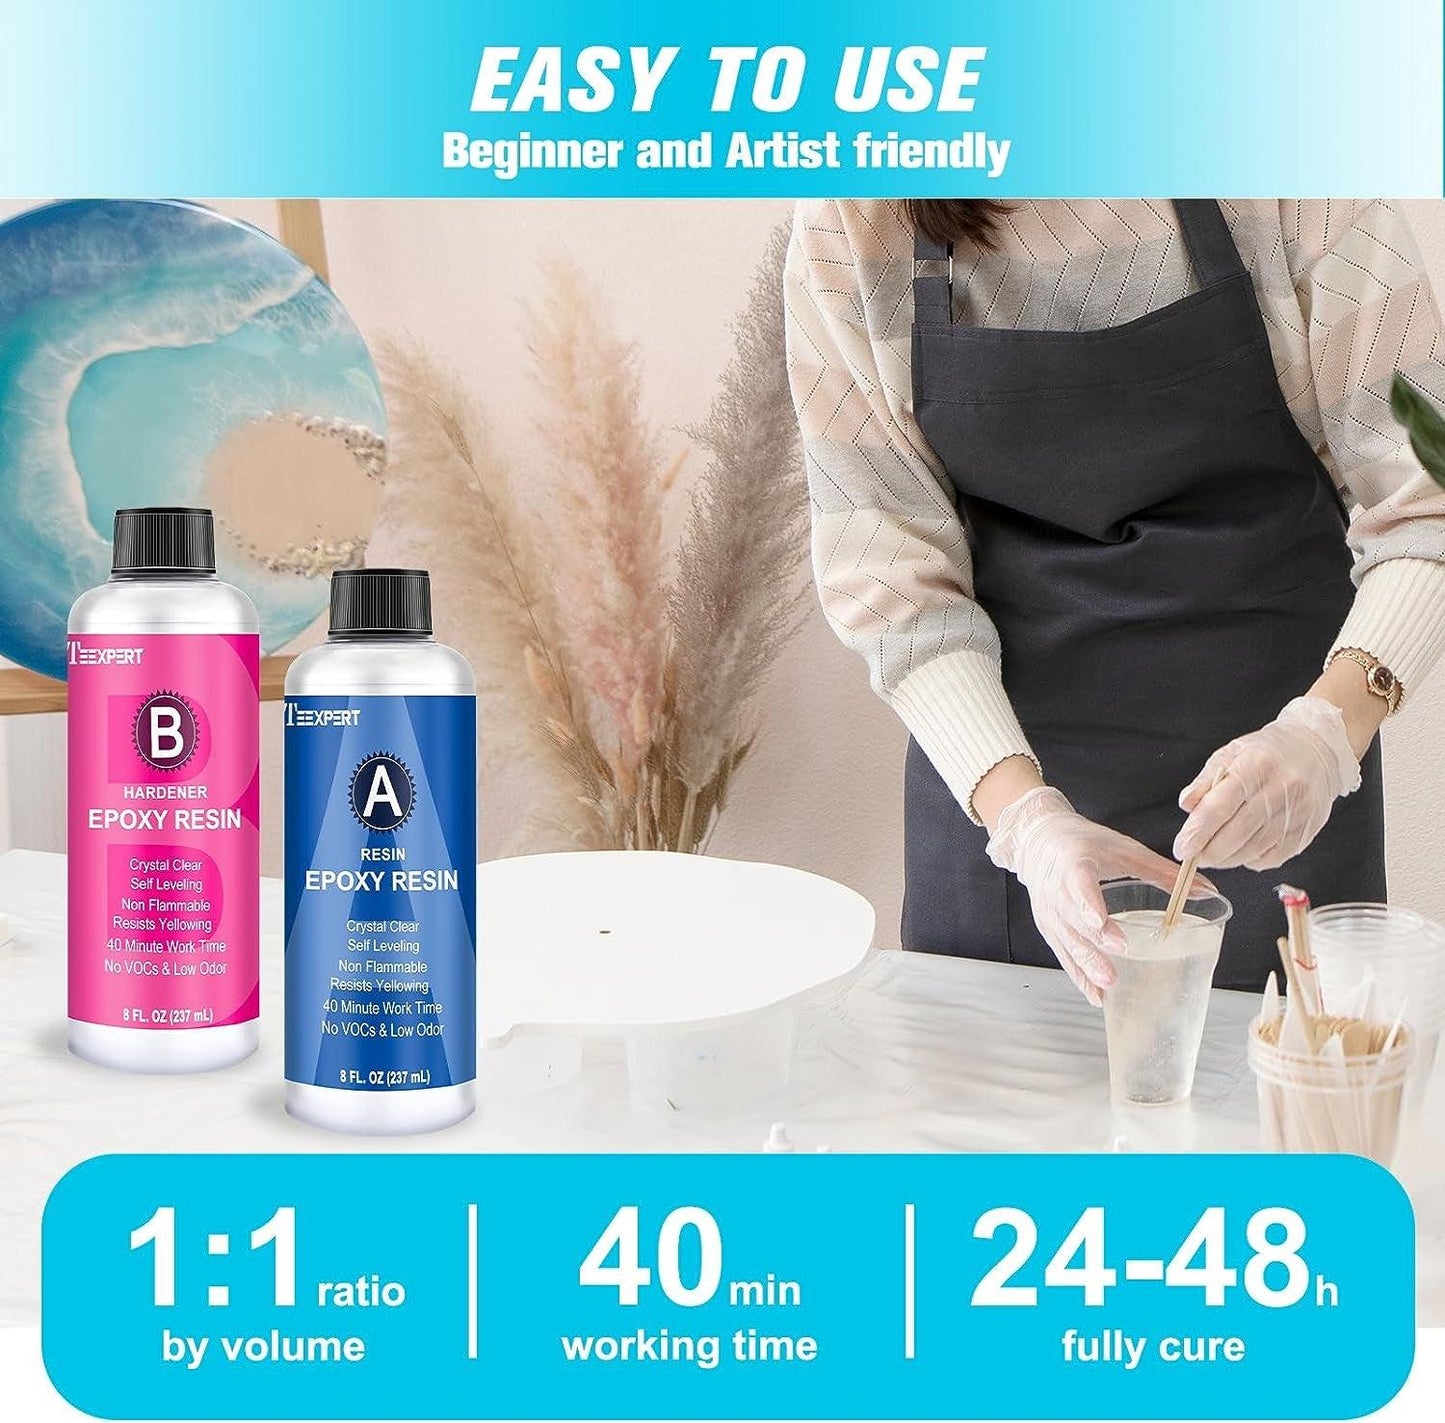 Epoxy Resin Kit 16Oz, Self-Leveling, Crystal Clear & Bubble-Free Epoxy Resin, Coating and Casting Resin for DIY Art, Jewelry, Coasters, Molds - 1:1 Easy Mix (8Oz Resin and 8Oz Hardener) - WoodArtSupply